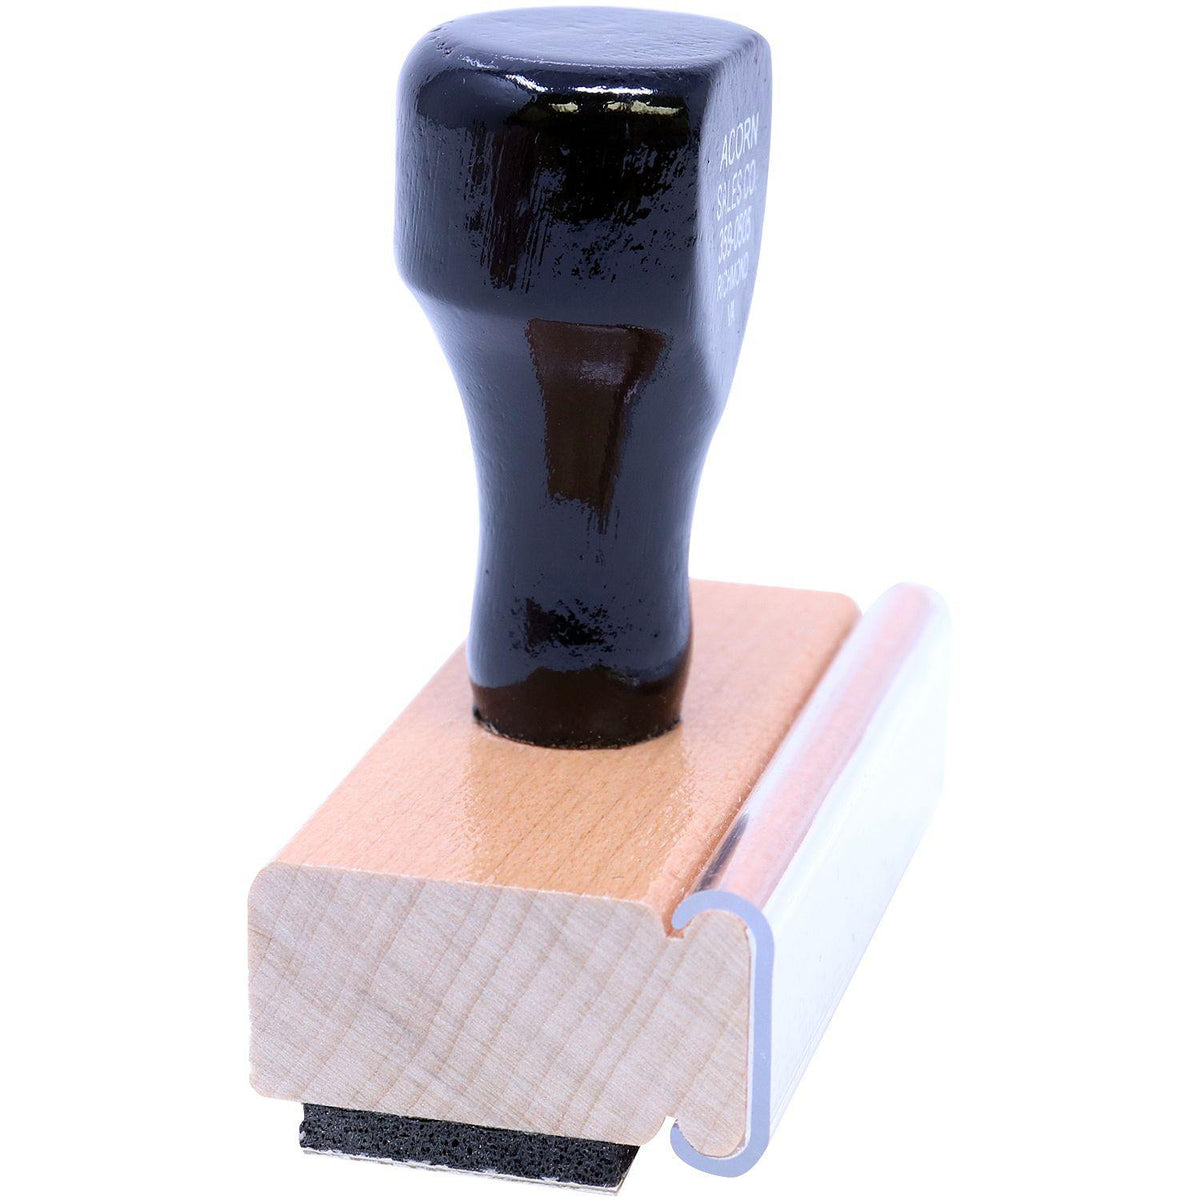 Side View of Cargado Rubber Stamp at an Angle